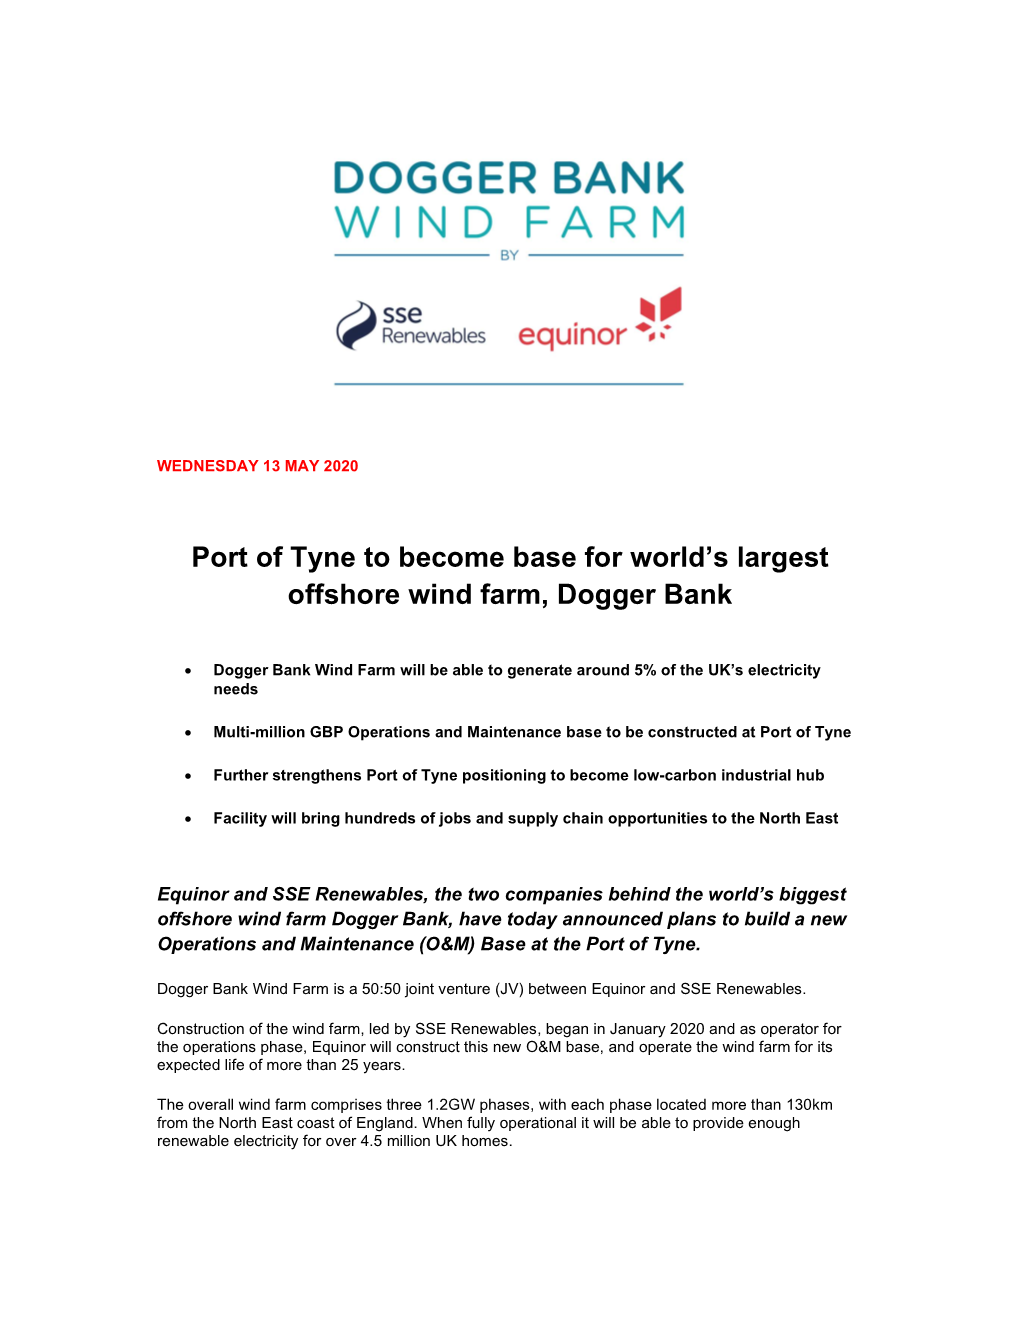 Port of Tyne to Become Base for World's Largest Offshore Wind Farm, Dogger Bank